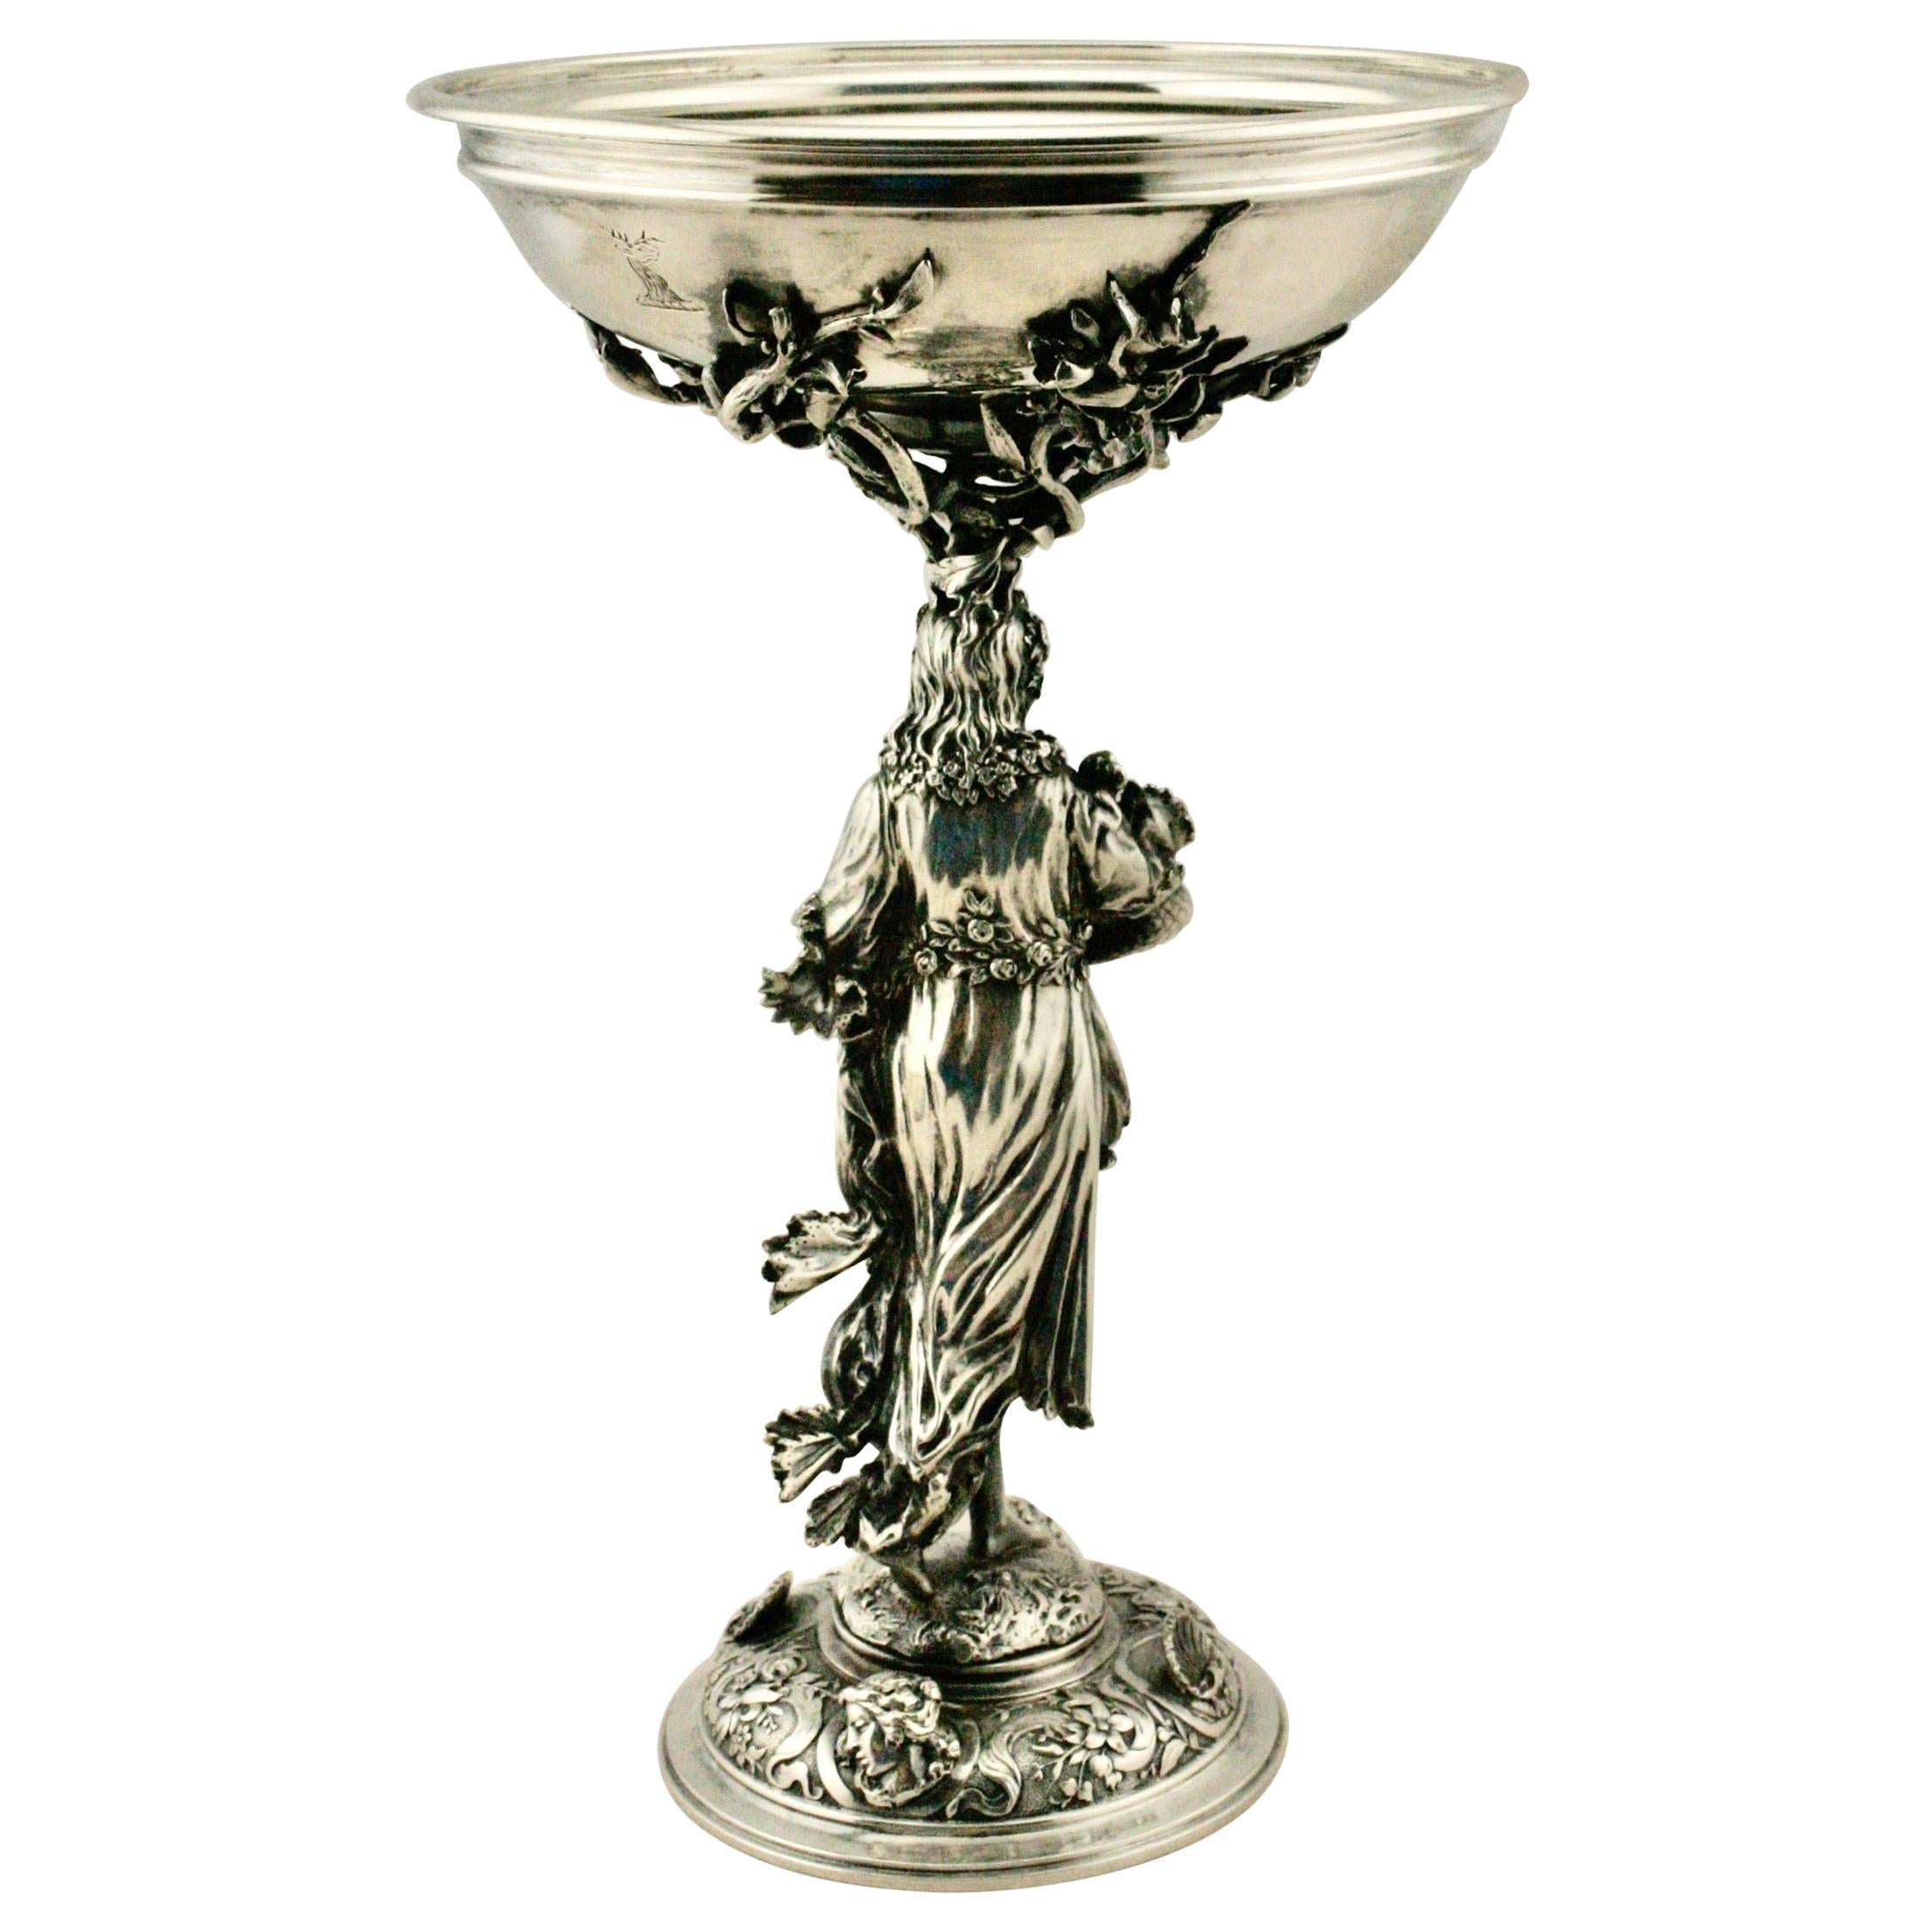 Italian Silver Figural Compote of Flora by G. Accarisi, Florence